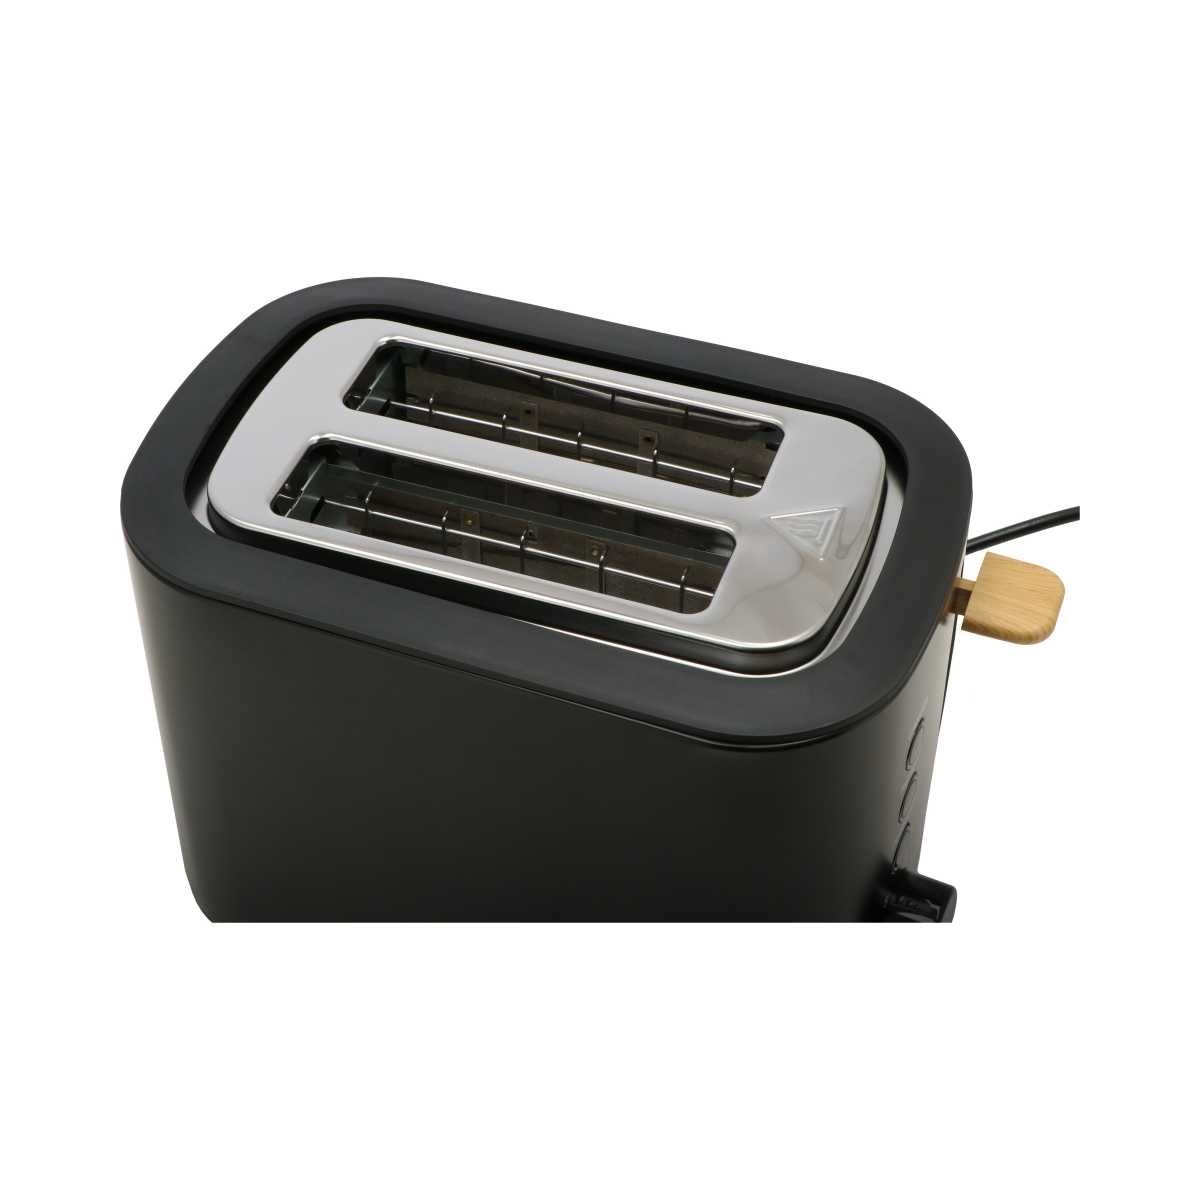 MESTIC MBR-200 Toaster - 1507770